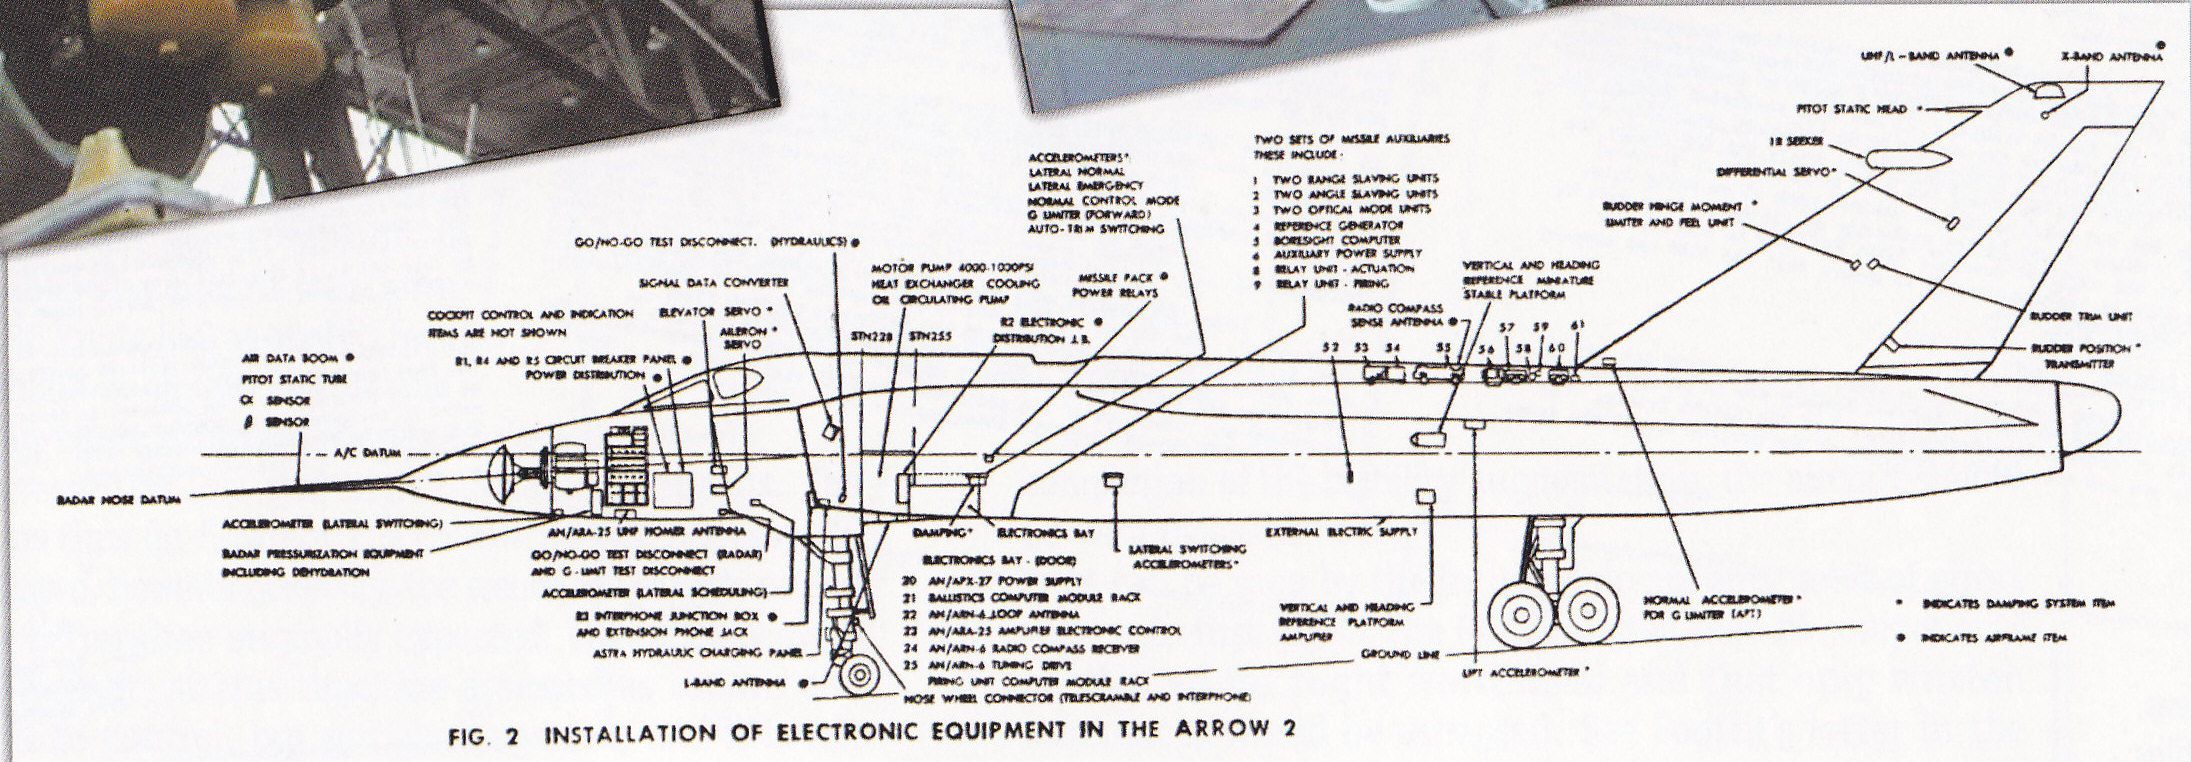 Cf-105_electronic_systems